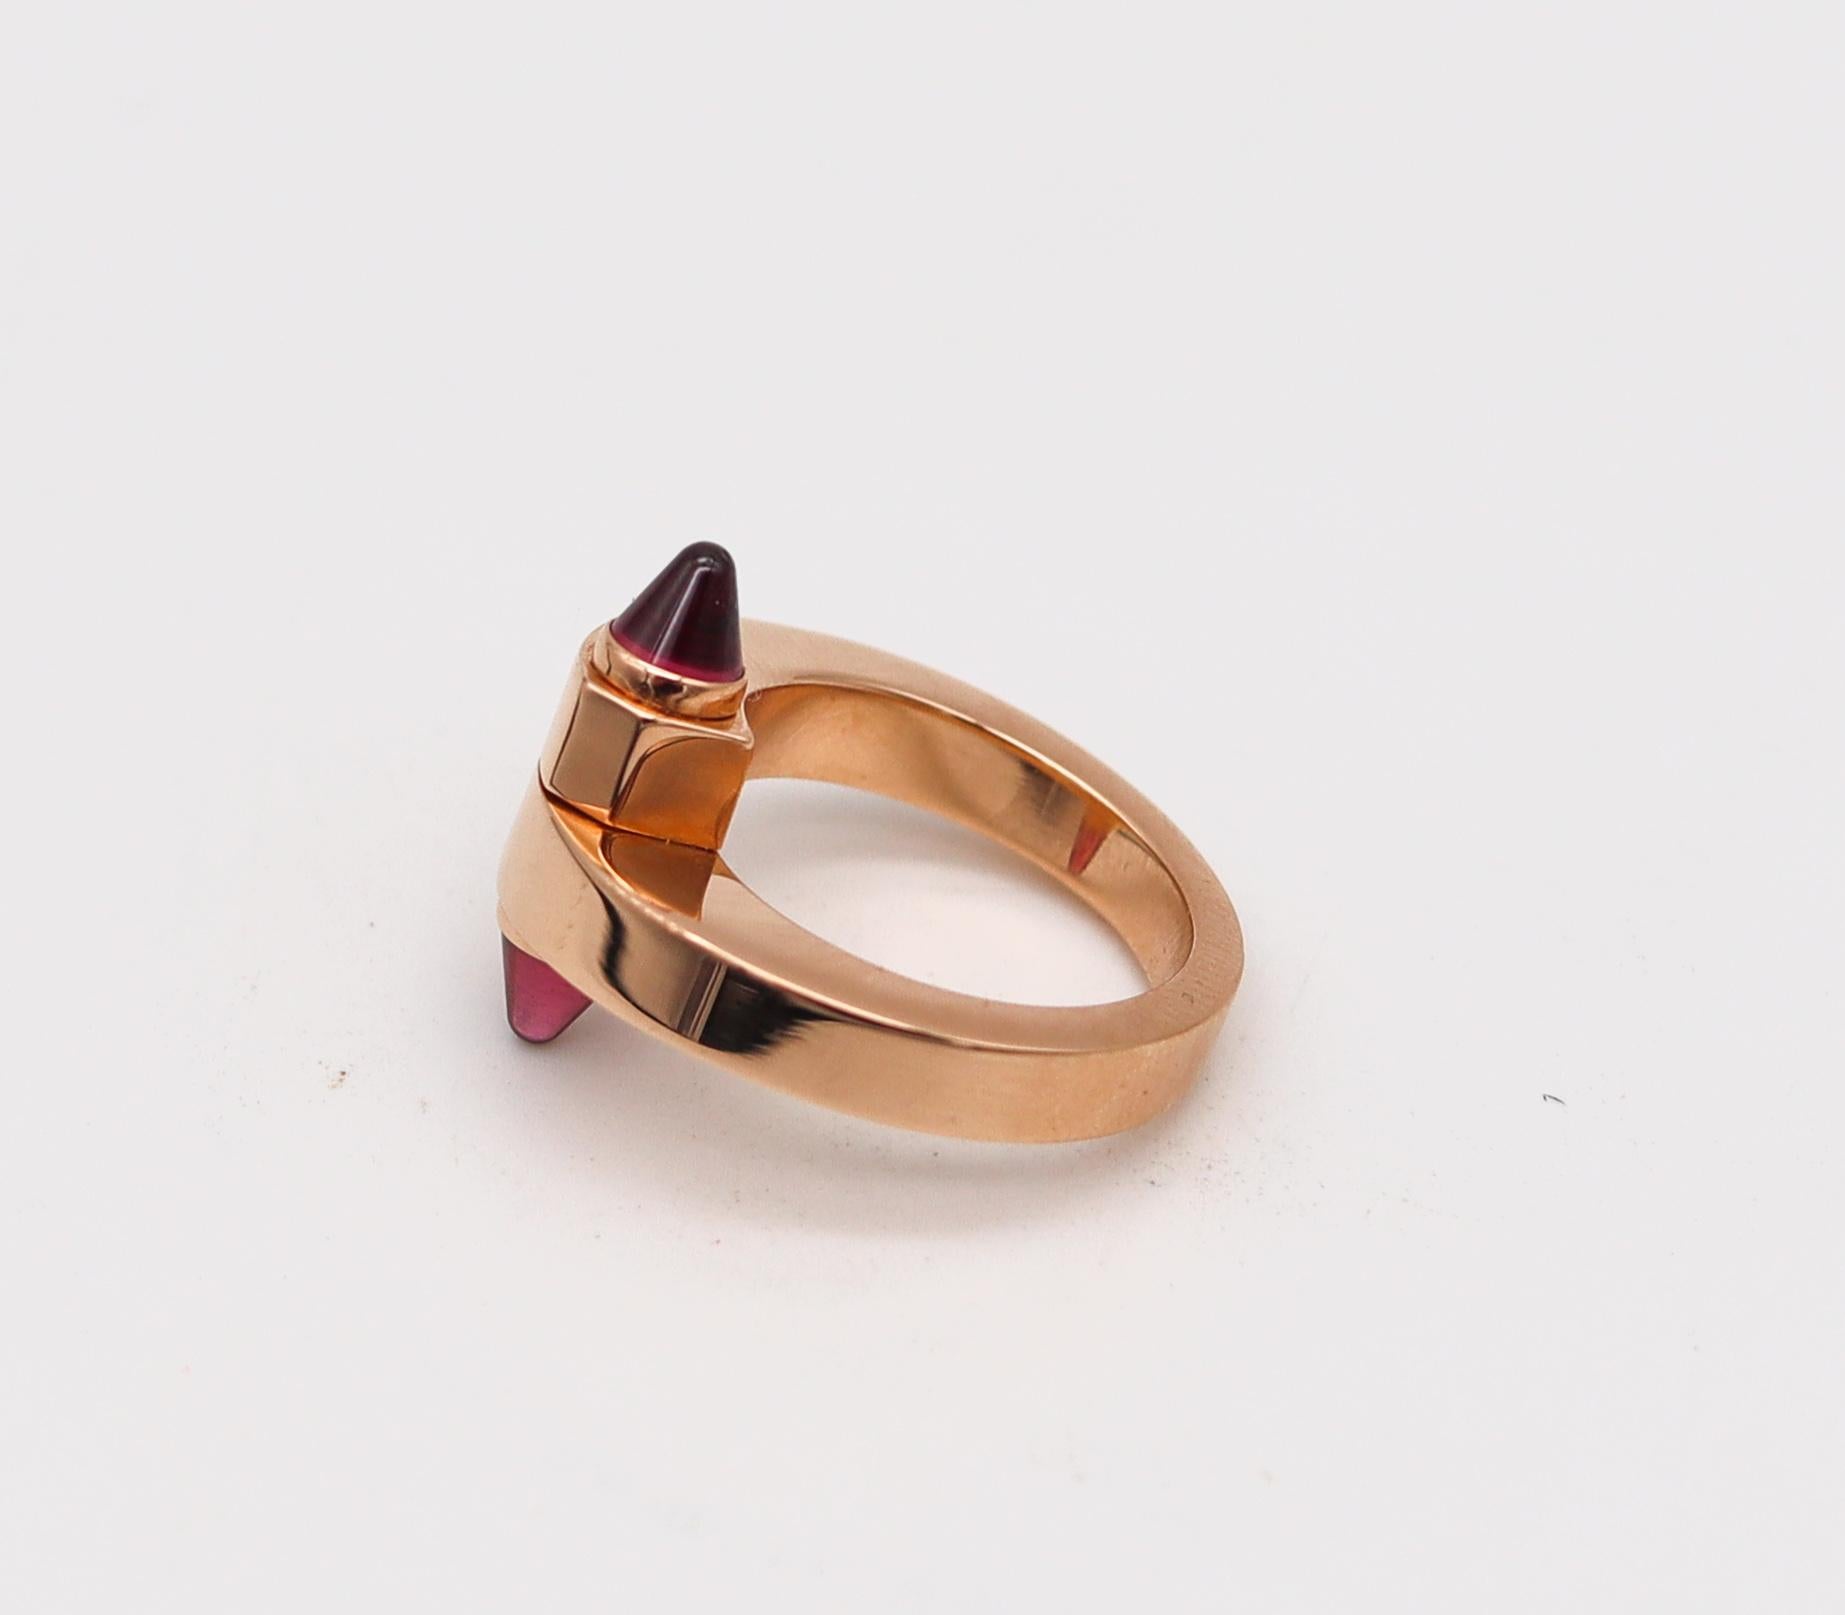 Cabochon Cartier Paris Geometric Menotte Ring in 18kt Gold with Rhodolite Garnets